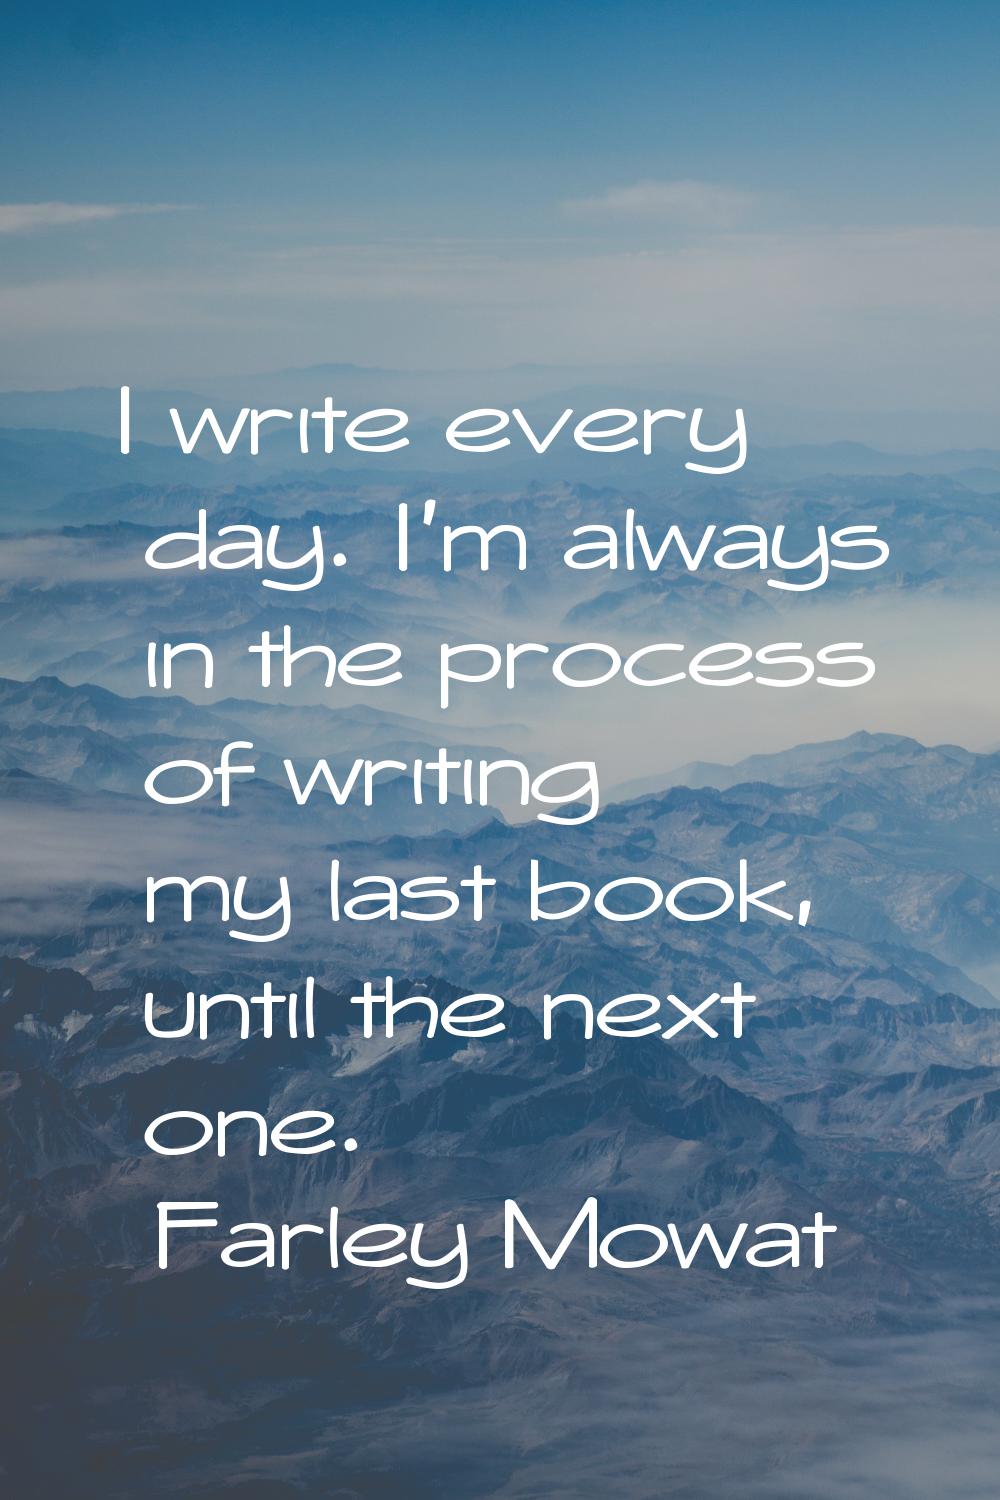 I write every day. I'm always in the process of writing my last book, until the next one.